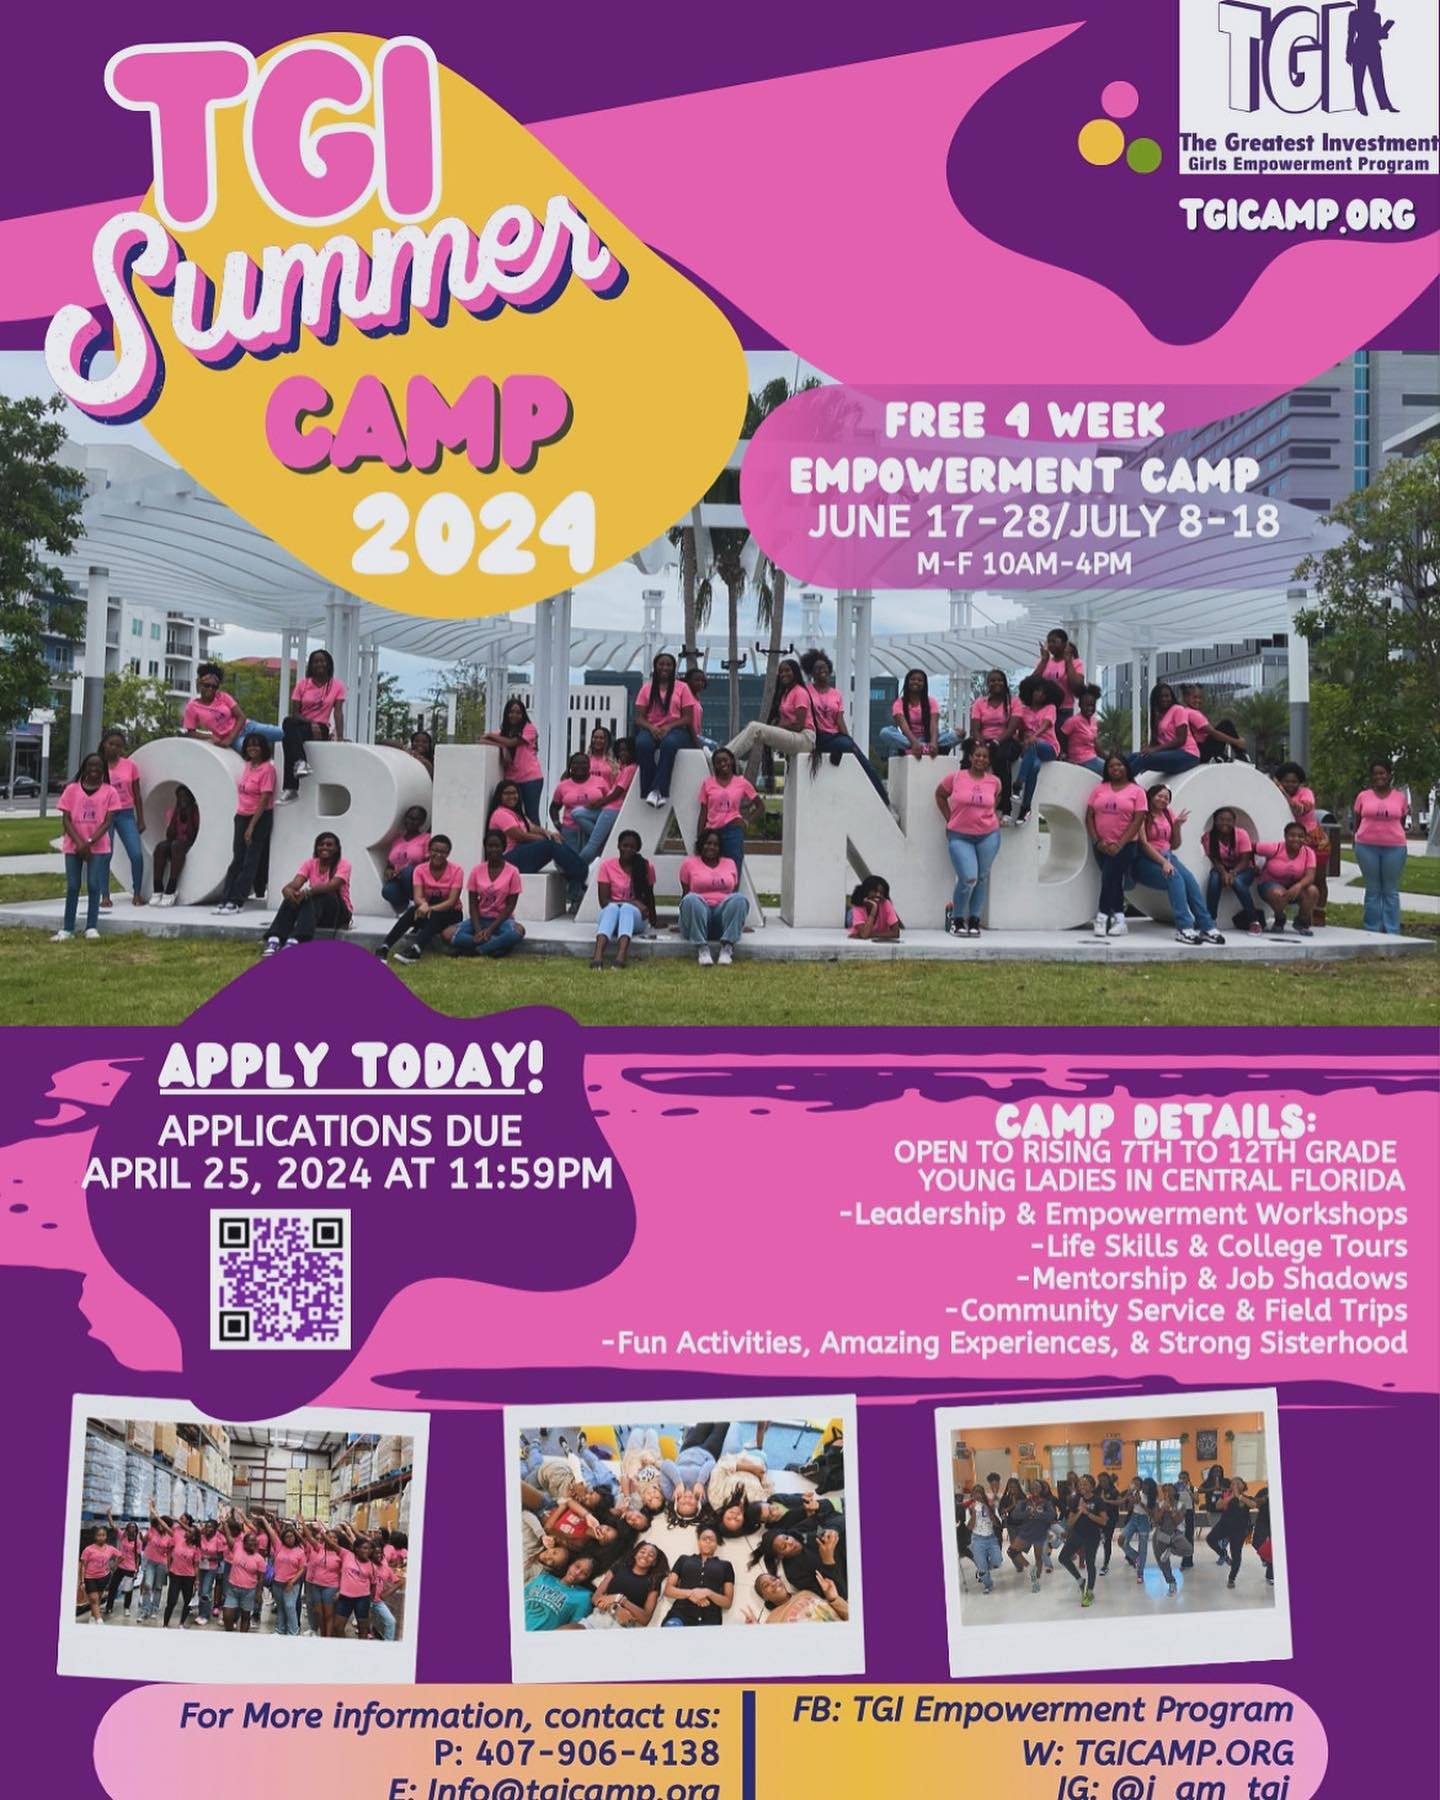 The TGI 2024 Summer Camp Application is due in 2 days. The application is available online at www.tgicamp.org and in our bio. 

Apply Today! We want all FUTURE FEMALE LEADERS to apply. Applications are due April 25, 2024 at 11:59 pm. If you know any 